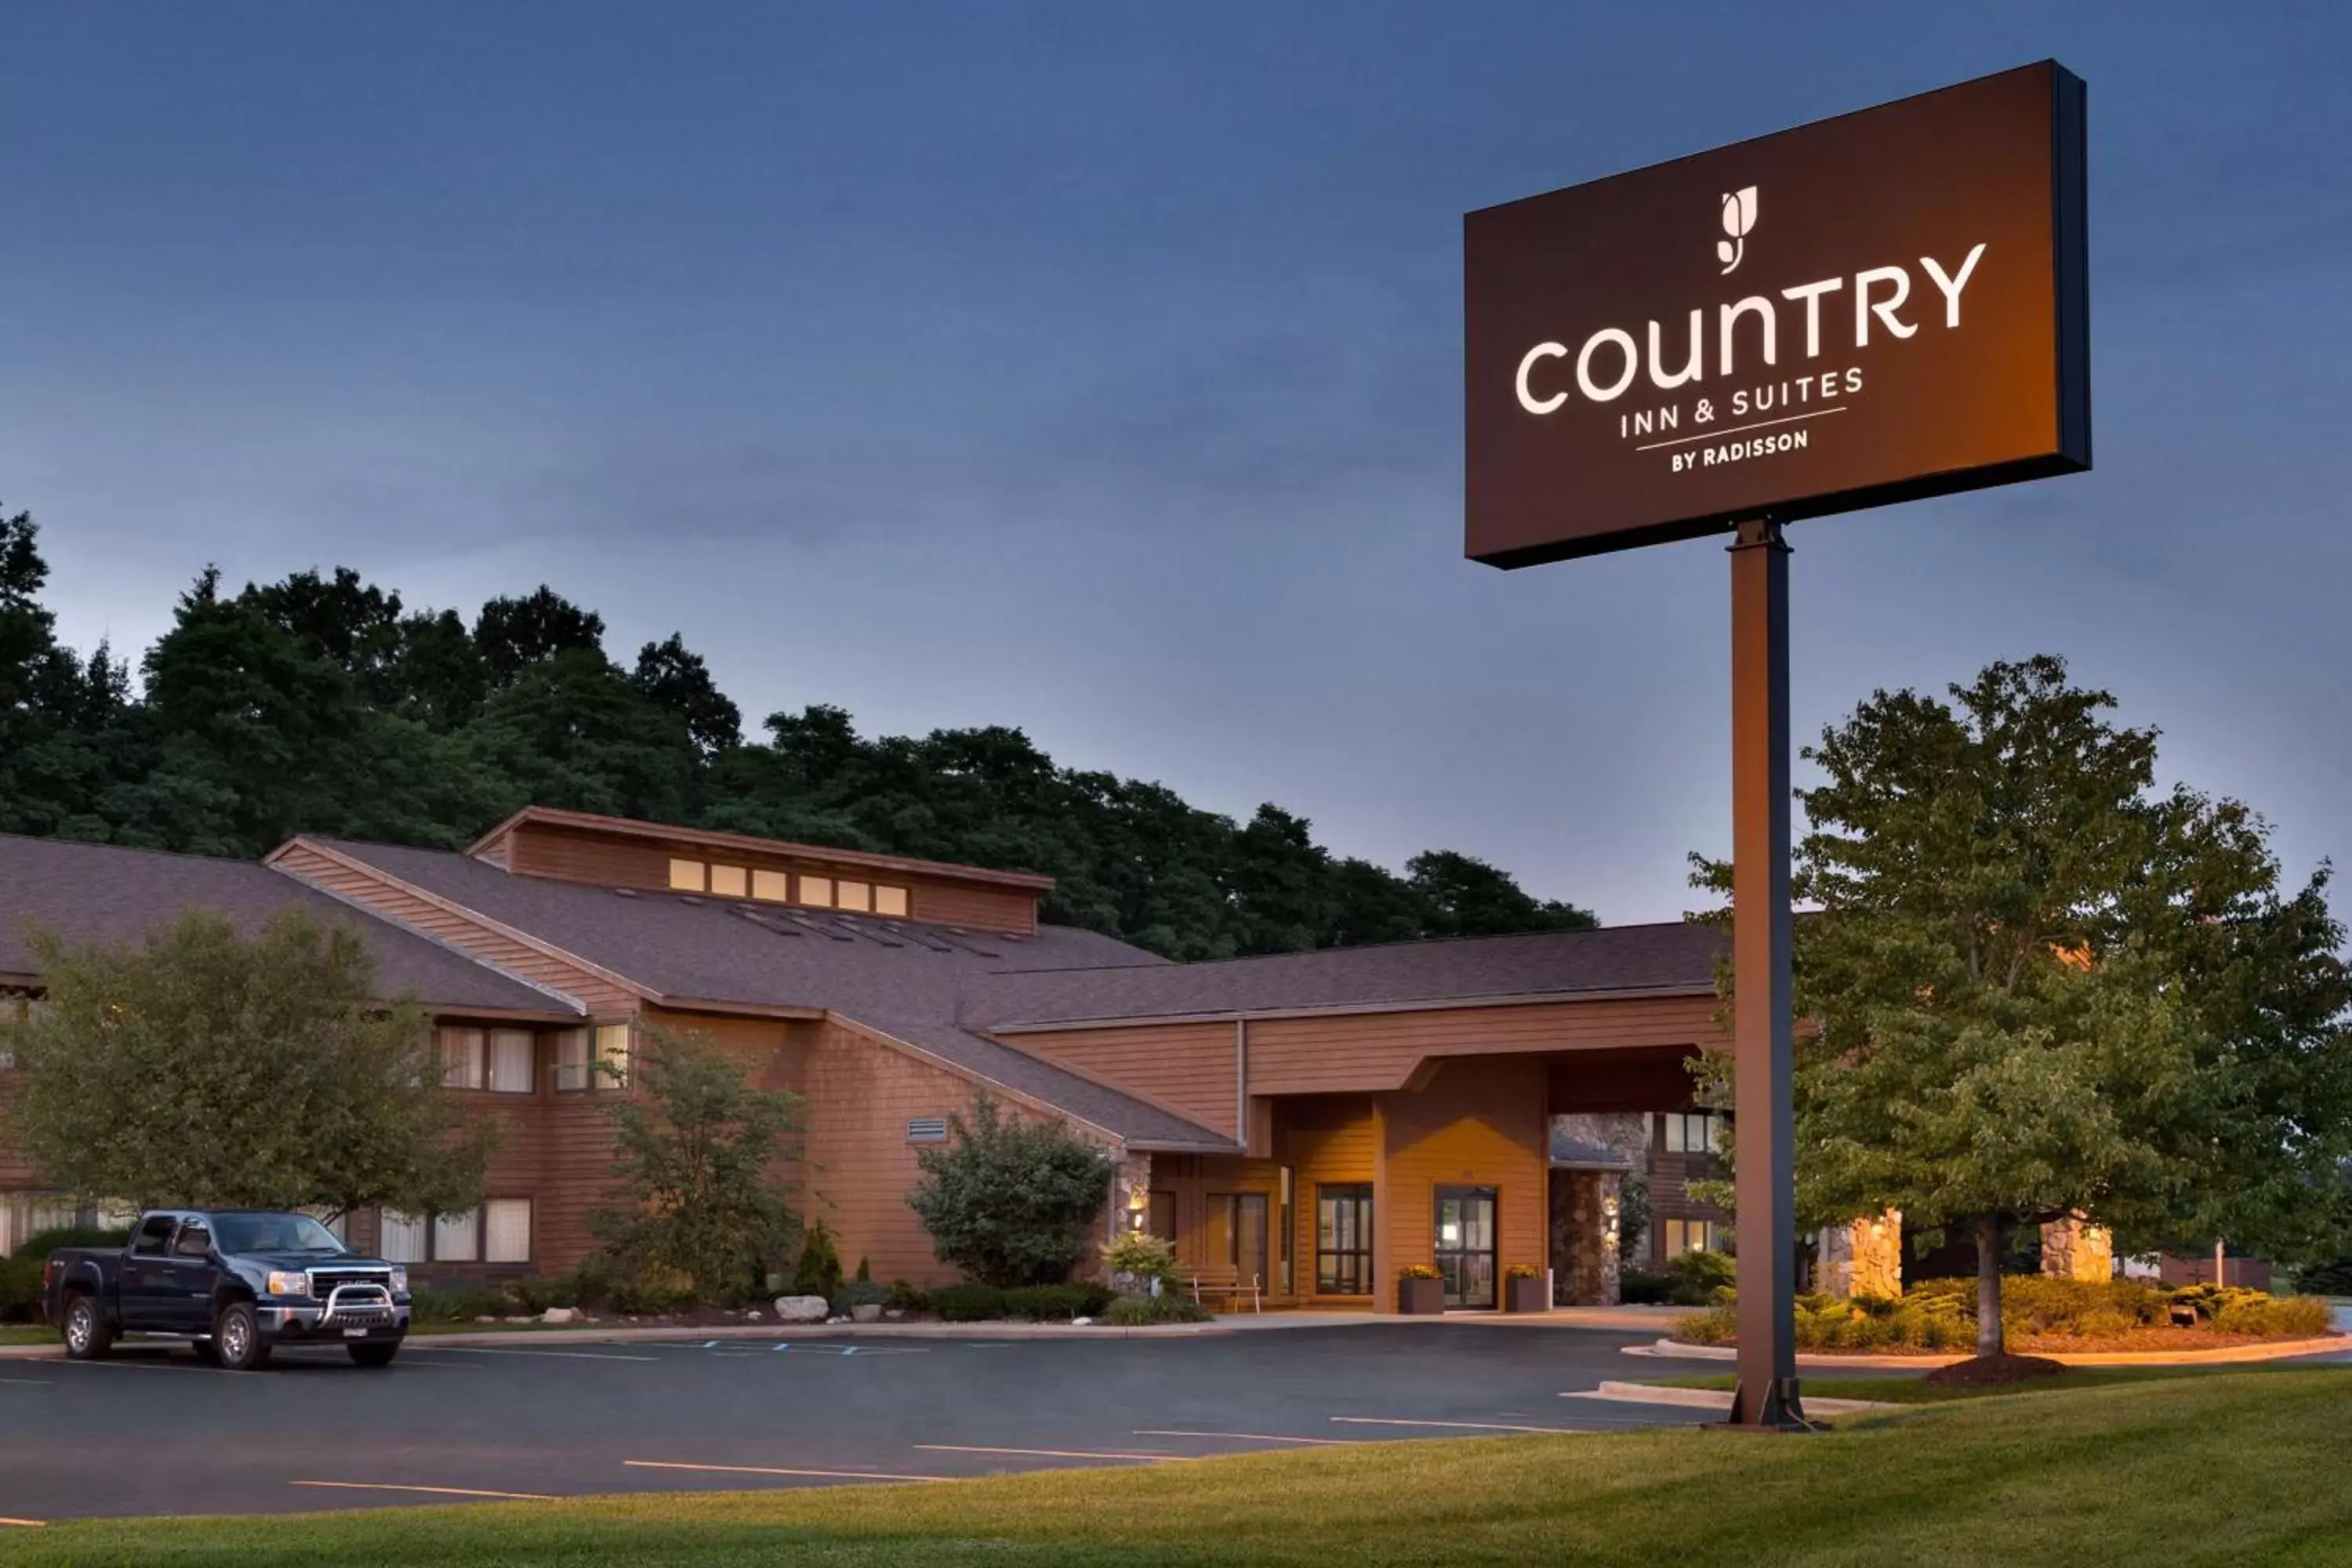 Property building in Country Inn & Suites by Radisson, Mishawaka, IN